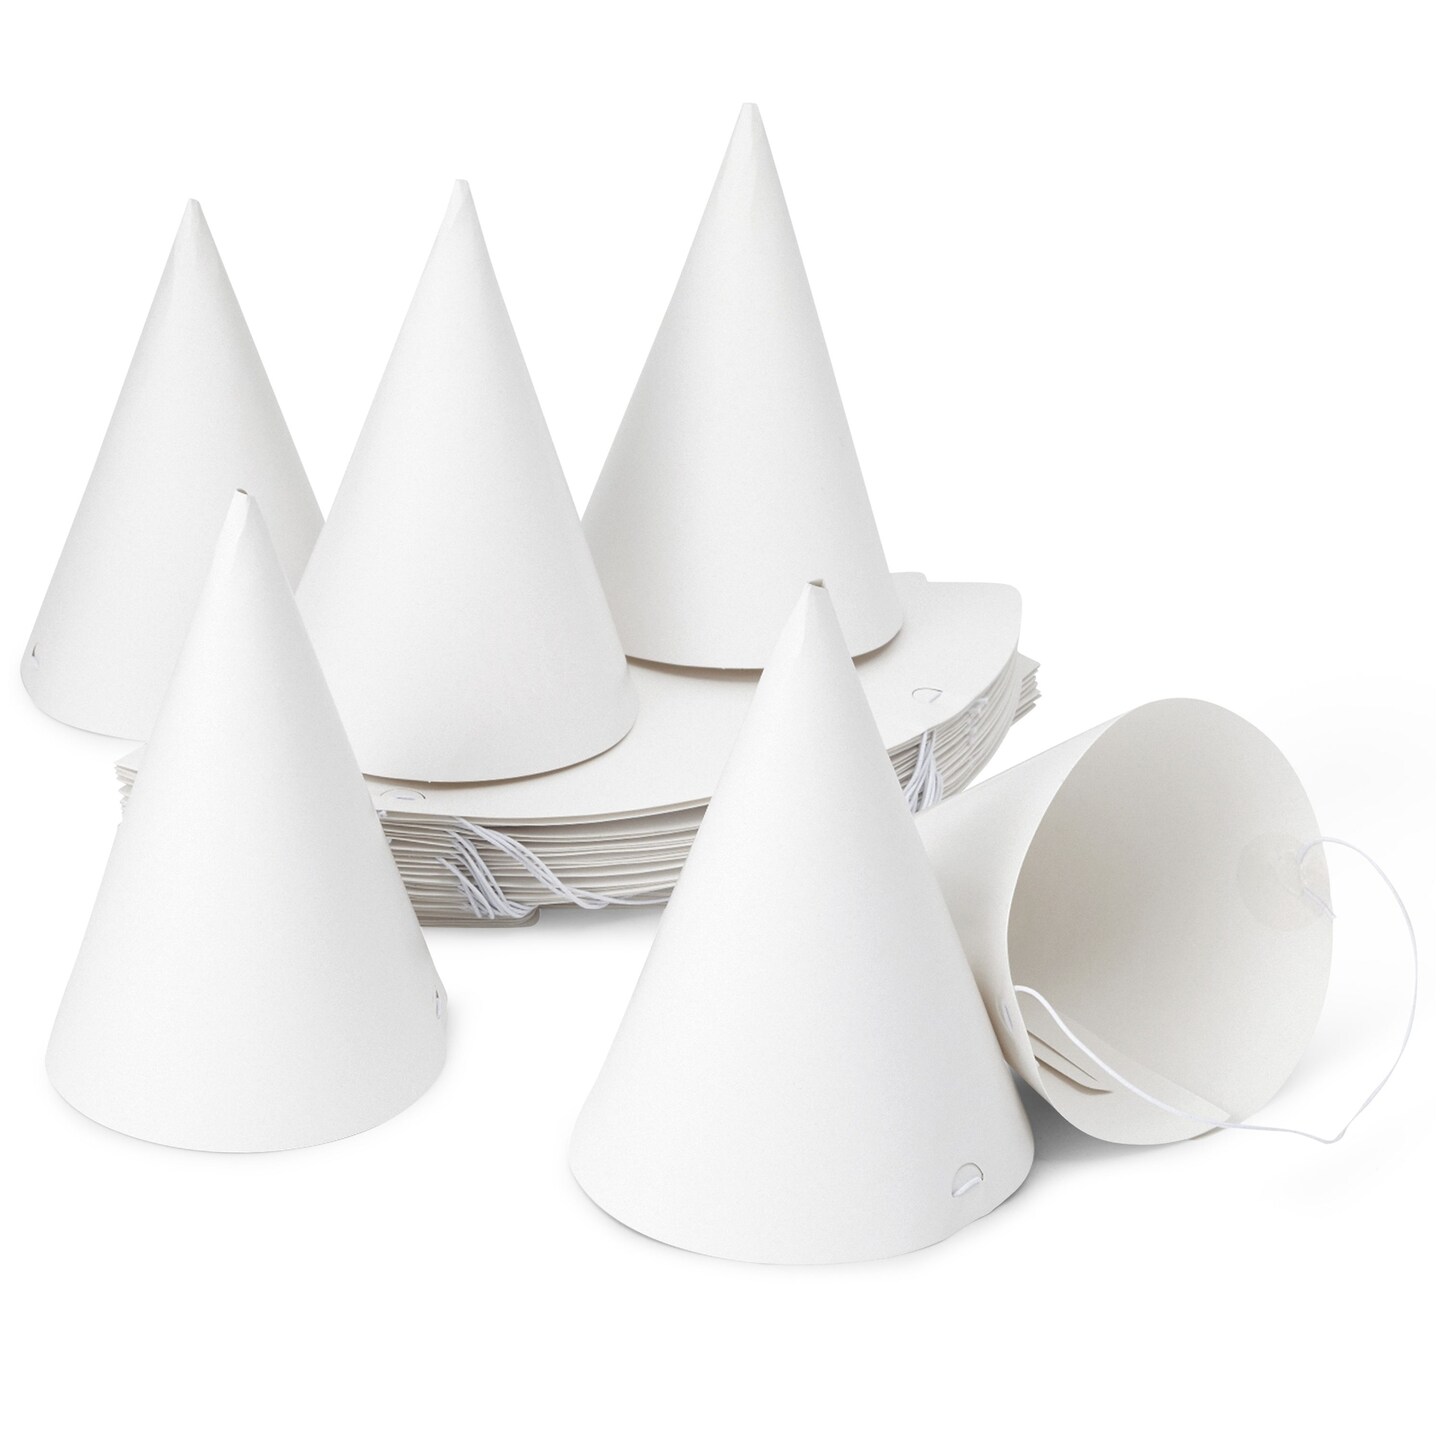 50 Pack White Party Hats for Birthday - Blank Cone Hat for Painting, Crafts Supplies (6 in)